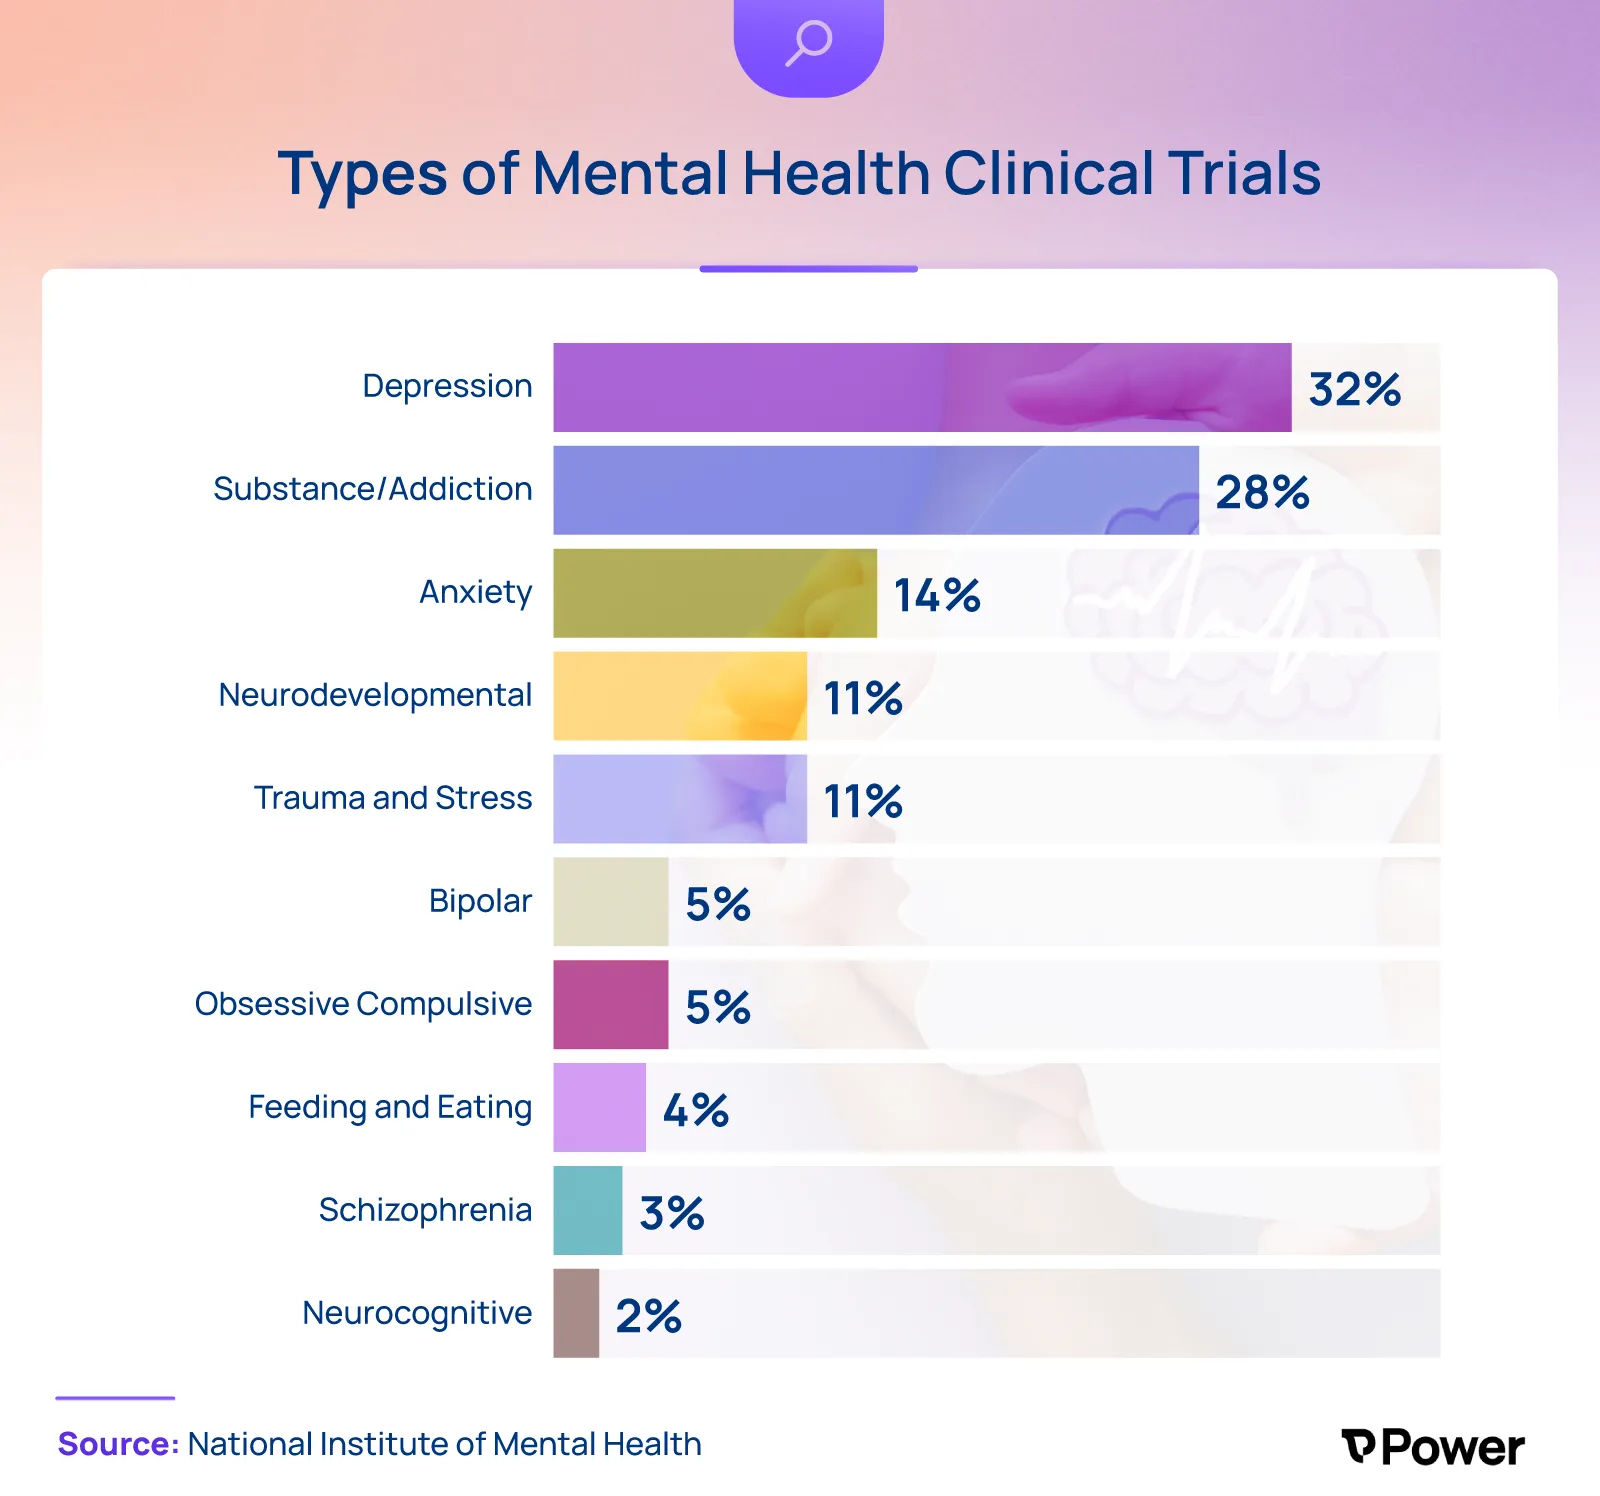 Types of Mental Health Clinical Trials